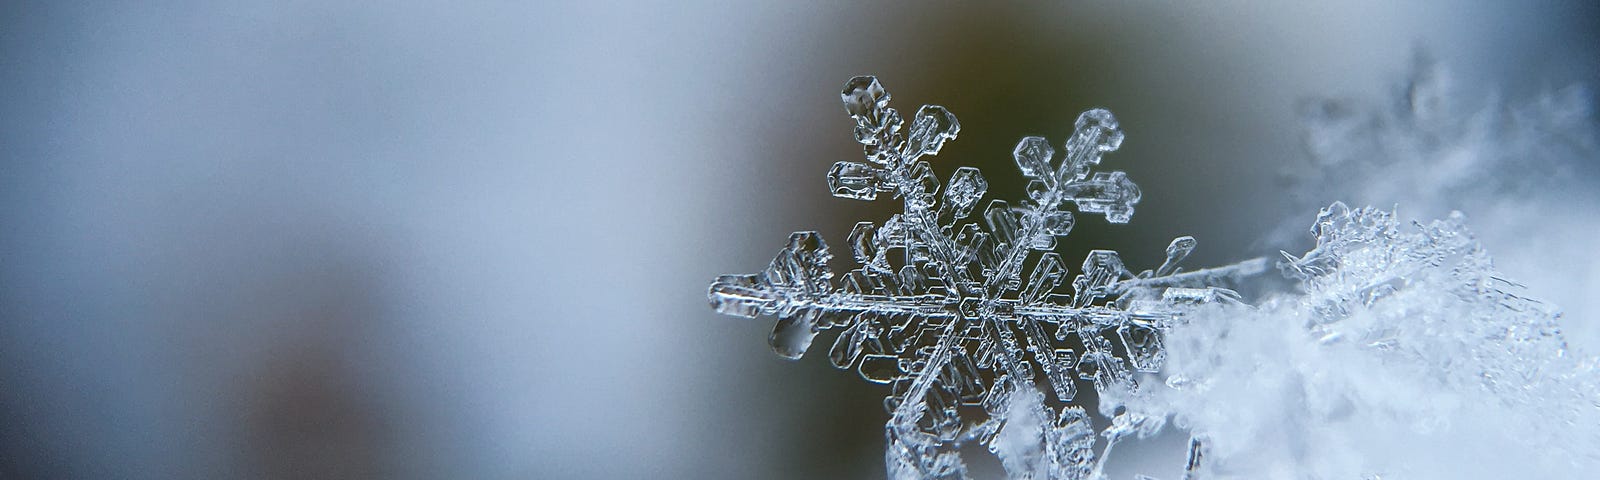 Image of a snowflake.